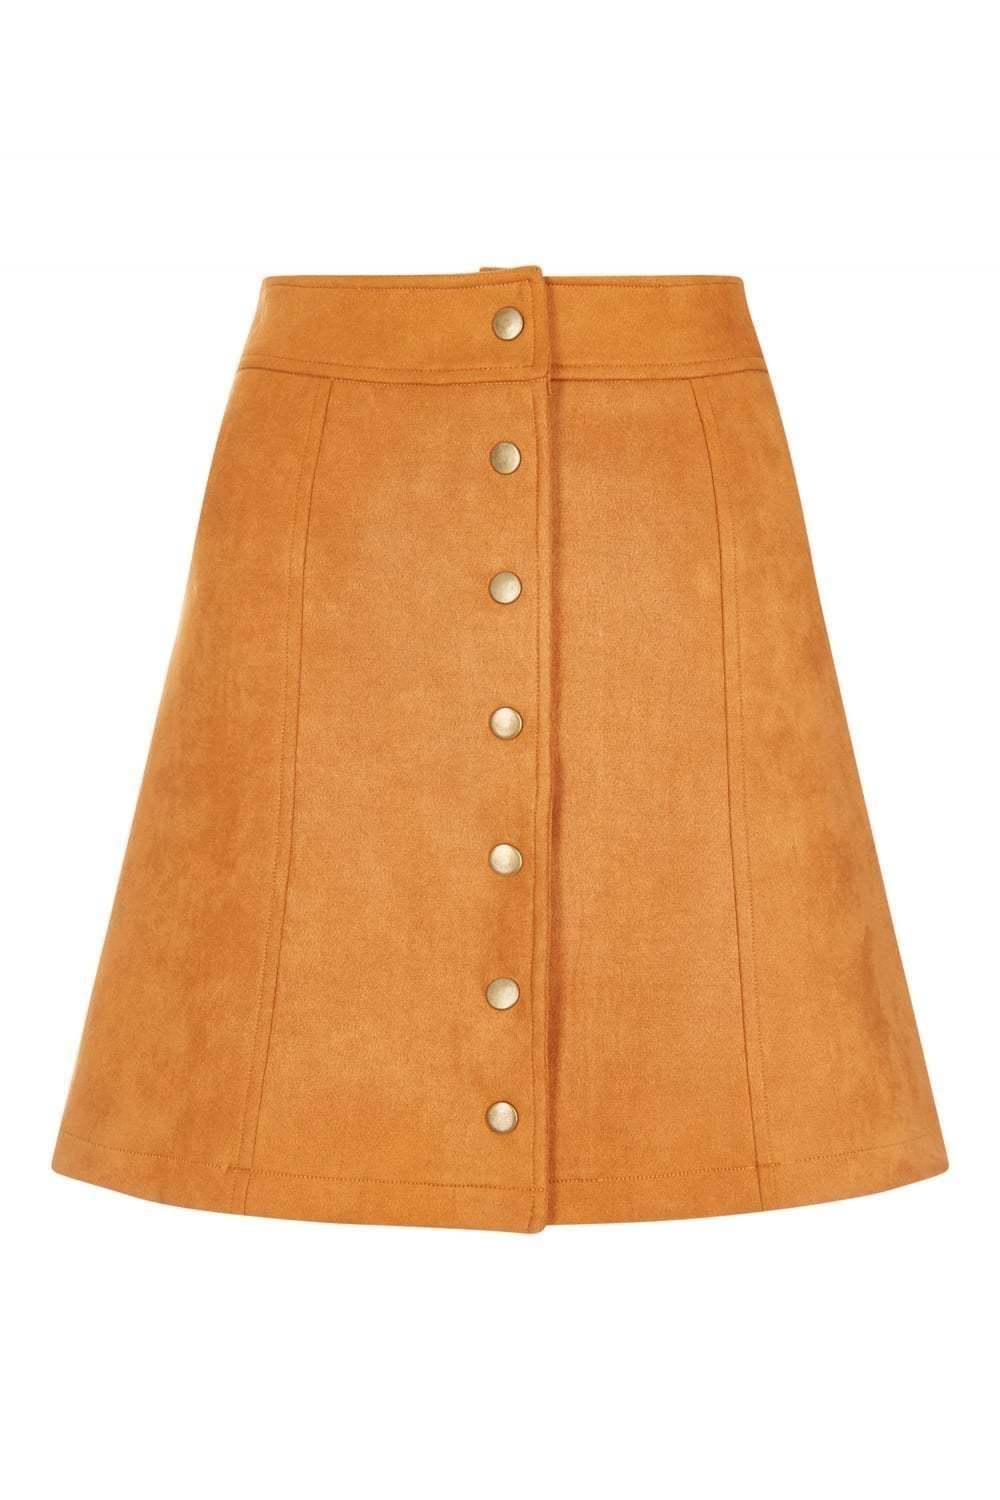 Vintage Button Up Skirt - Front View